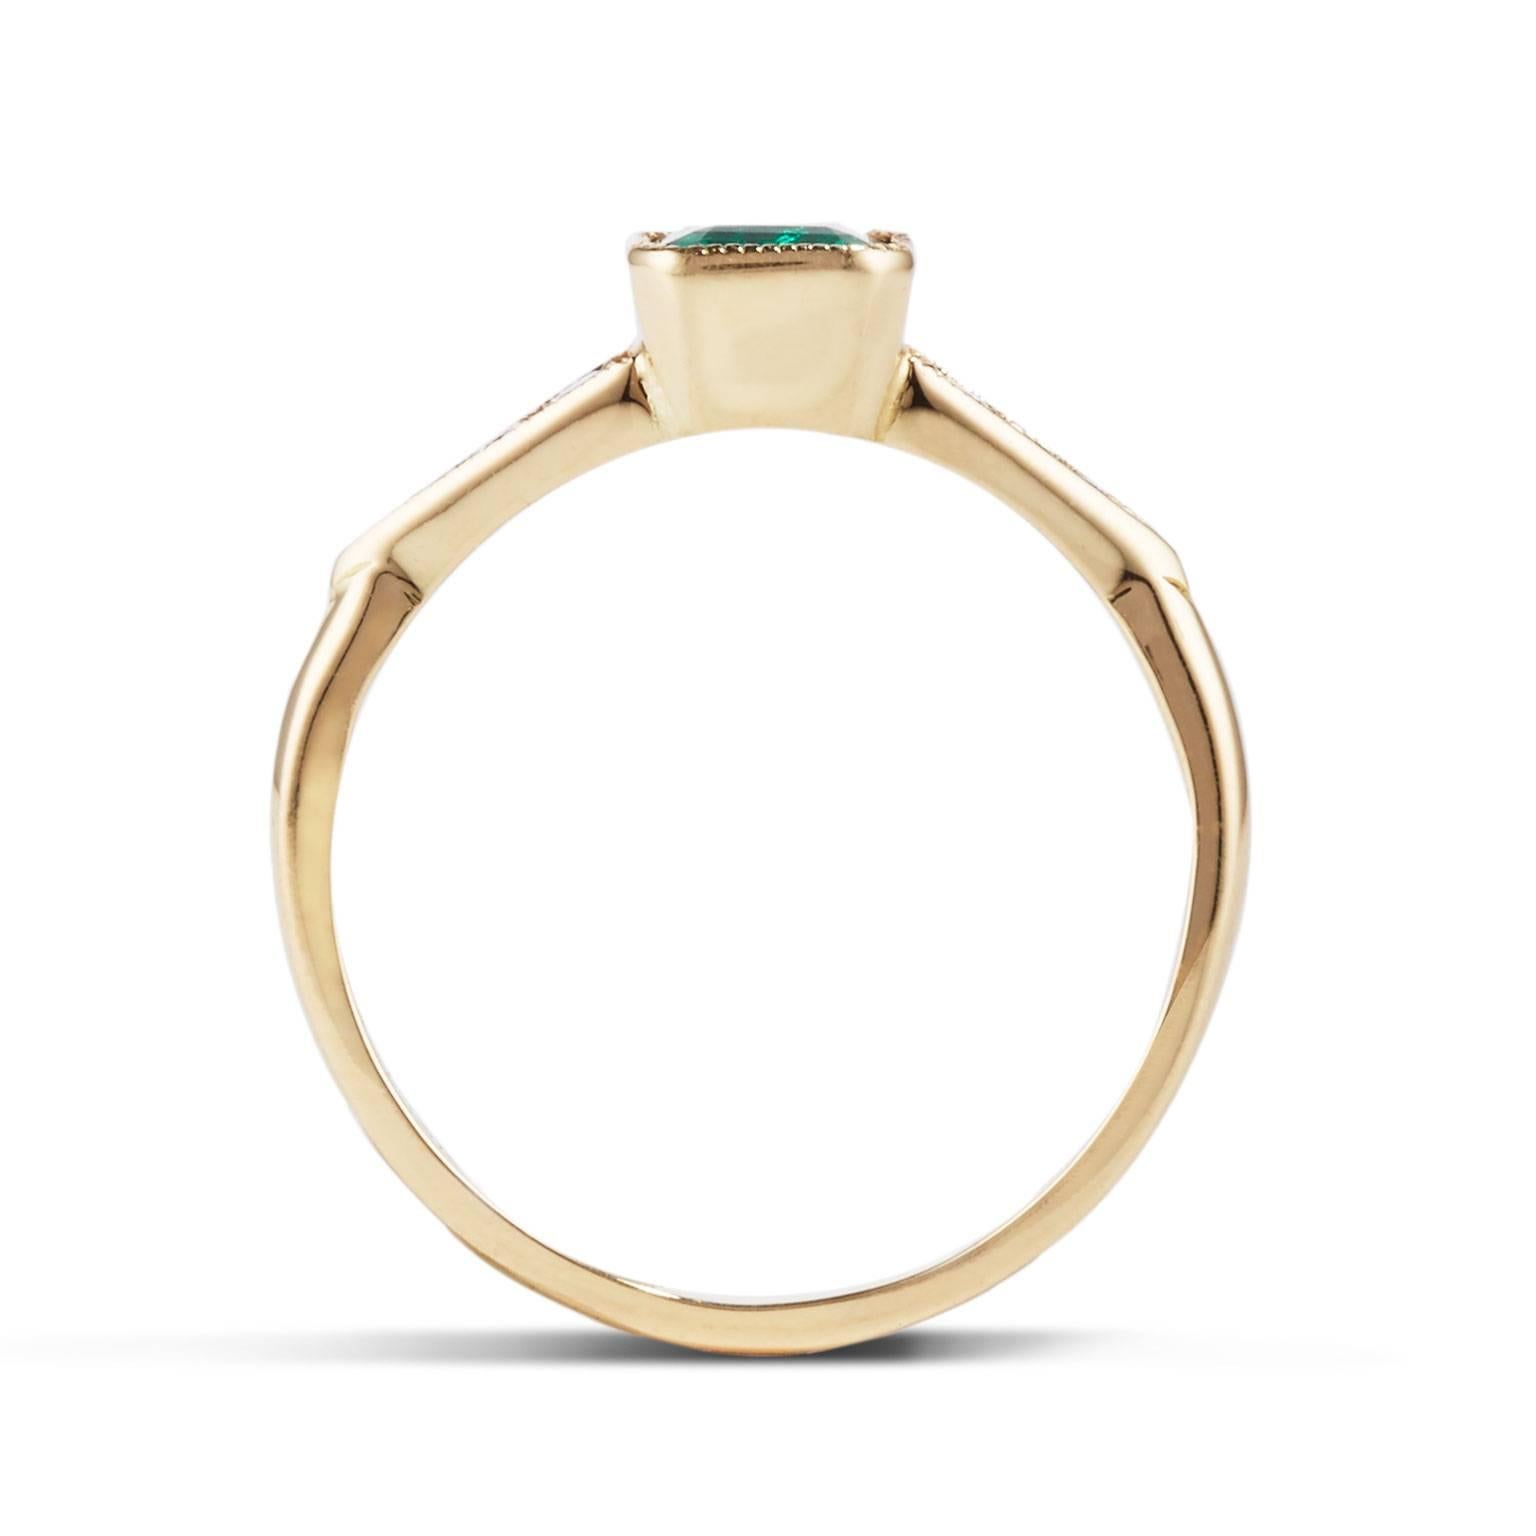 The square cut of this Muzo emerald creates a dramatic aesthetic in this stunning ring. The JARDIN ring from Cushla Whiting's Petite Colours collection is beautifully crafted in 18 carat gold holding a 0.51 carat Muzo Colombian emerald with small